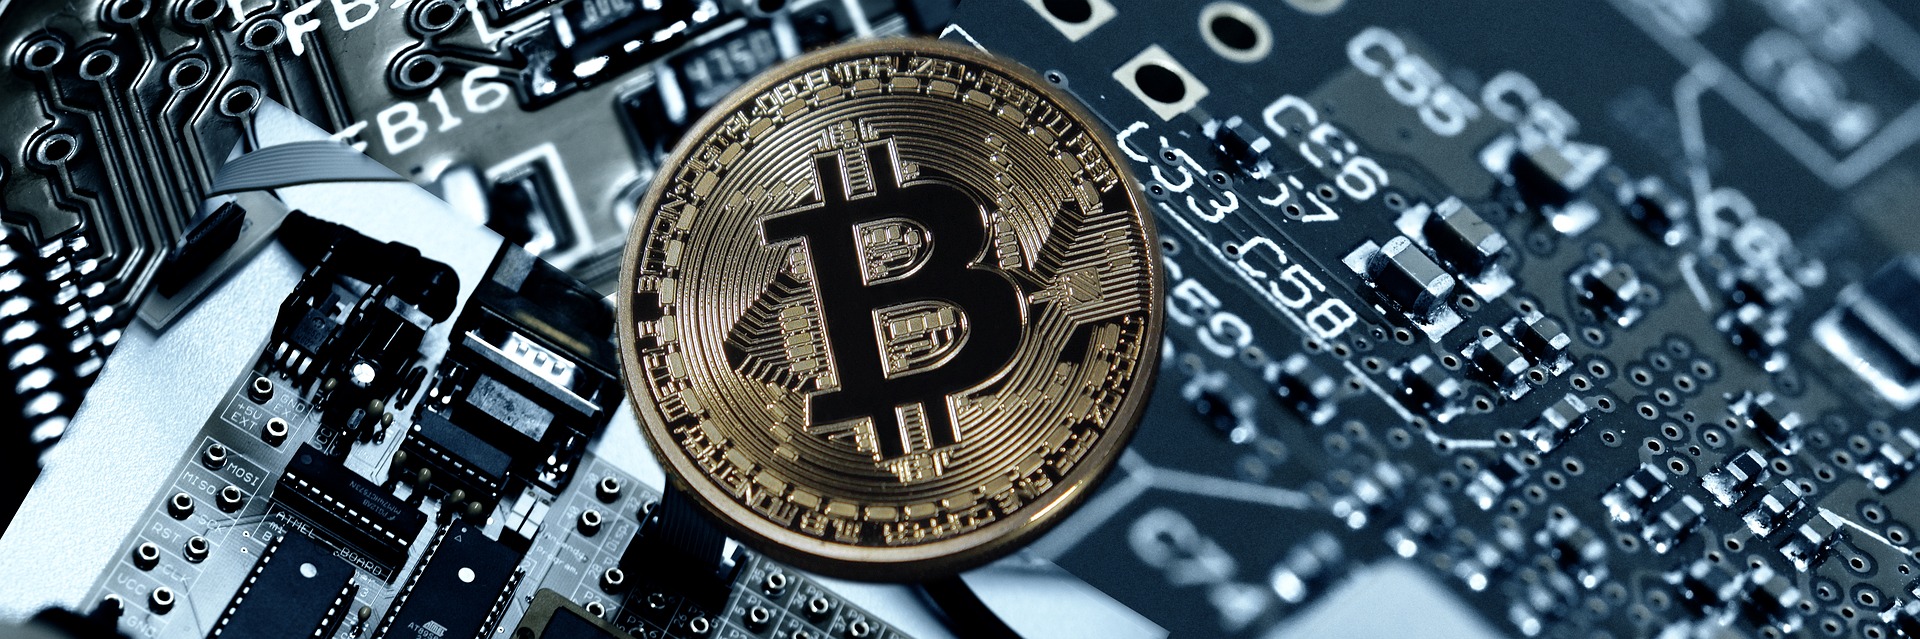 Are Bitcoin Transactions Untraceable?